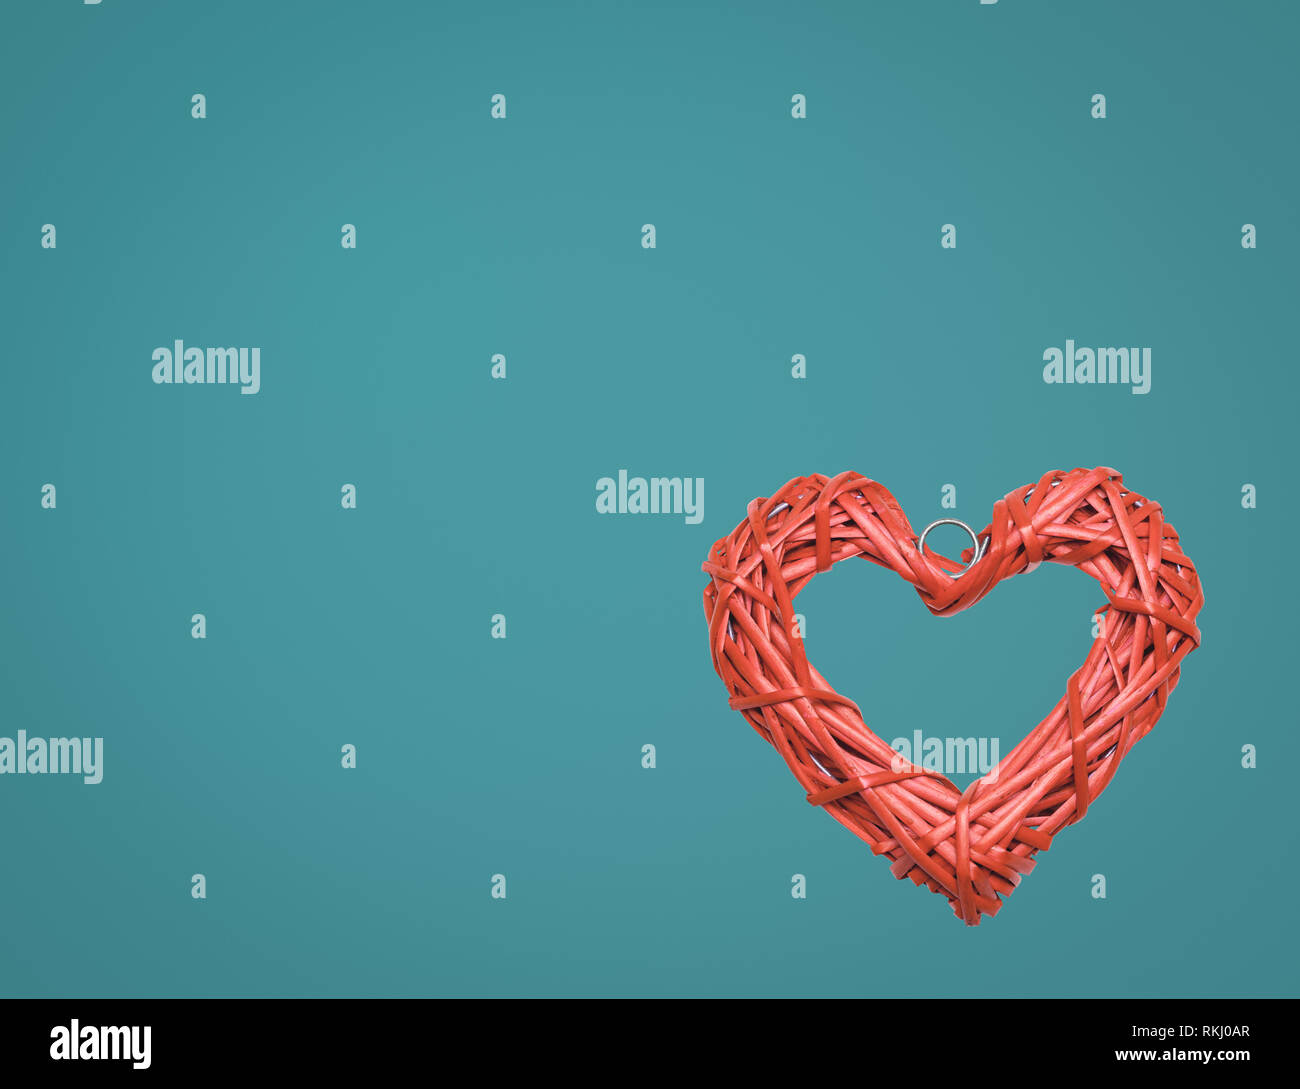 Living coral trendy color of the year 2019 heart shaped braided wicker on blue background Stock Photo